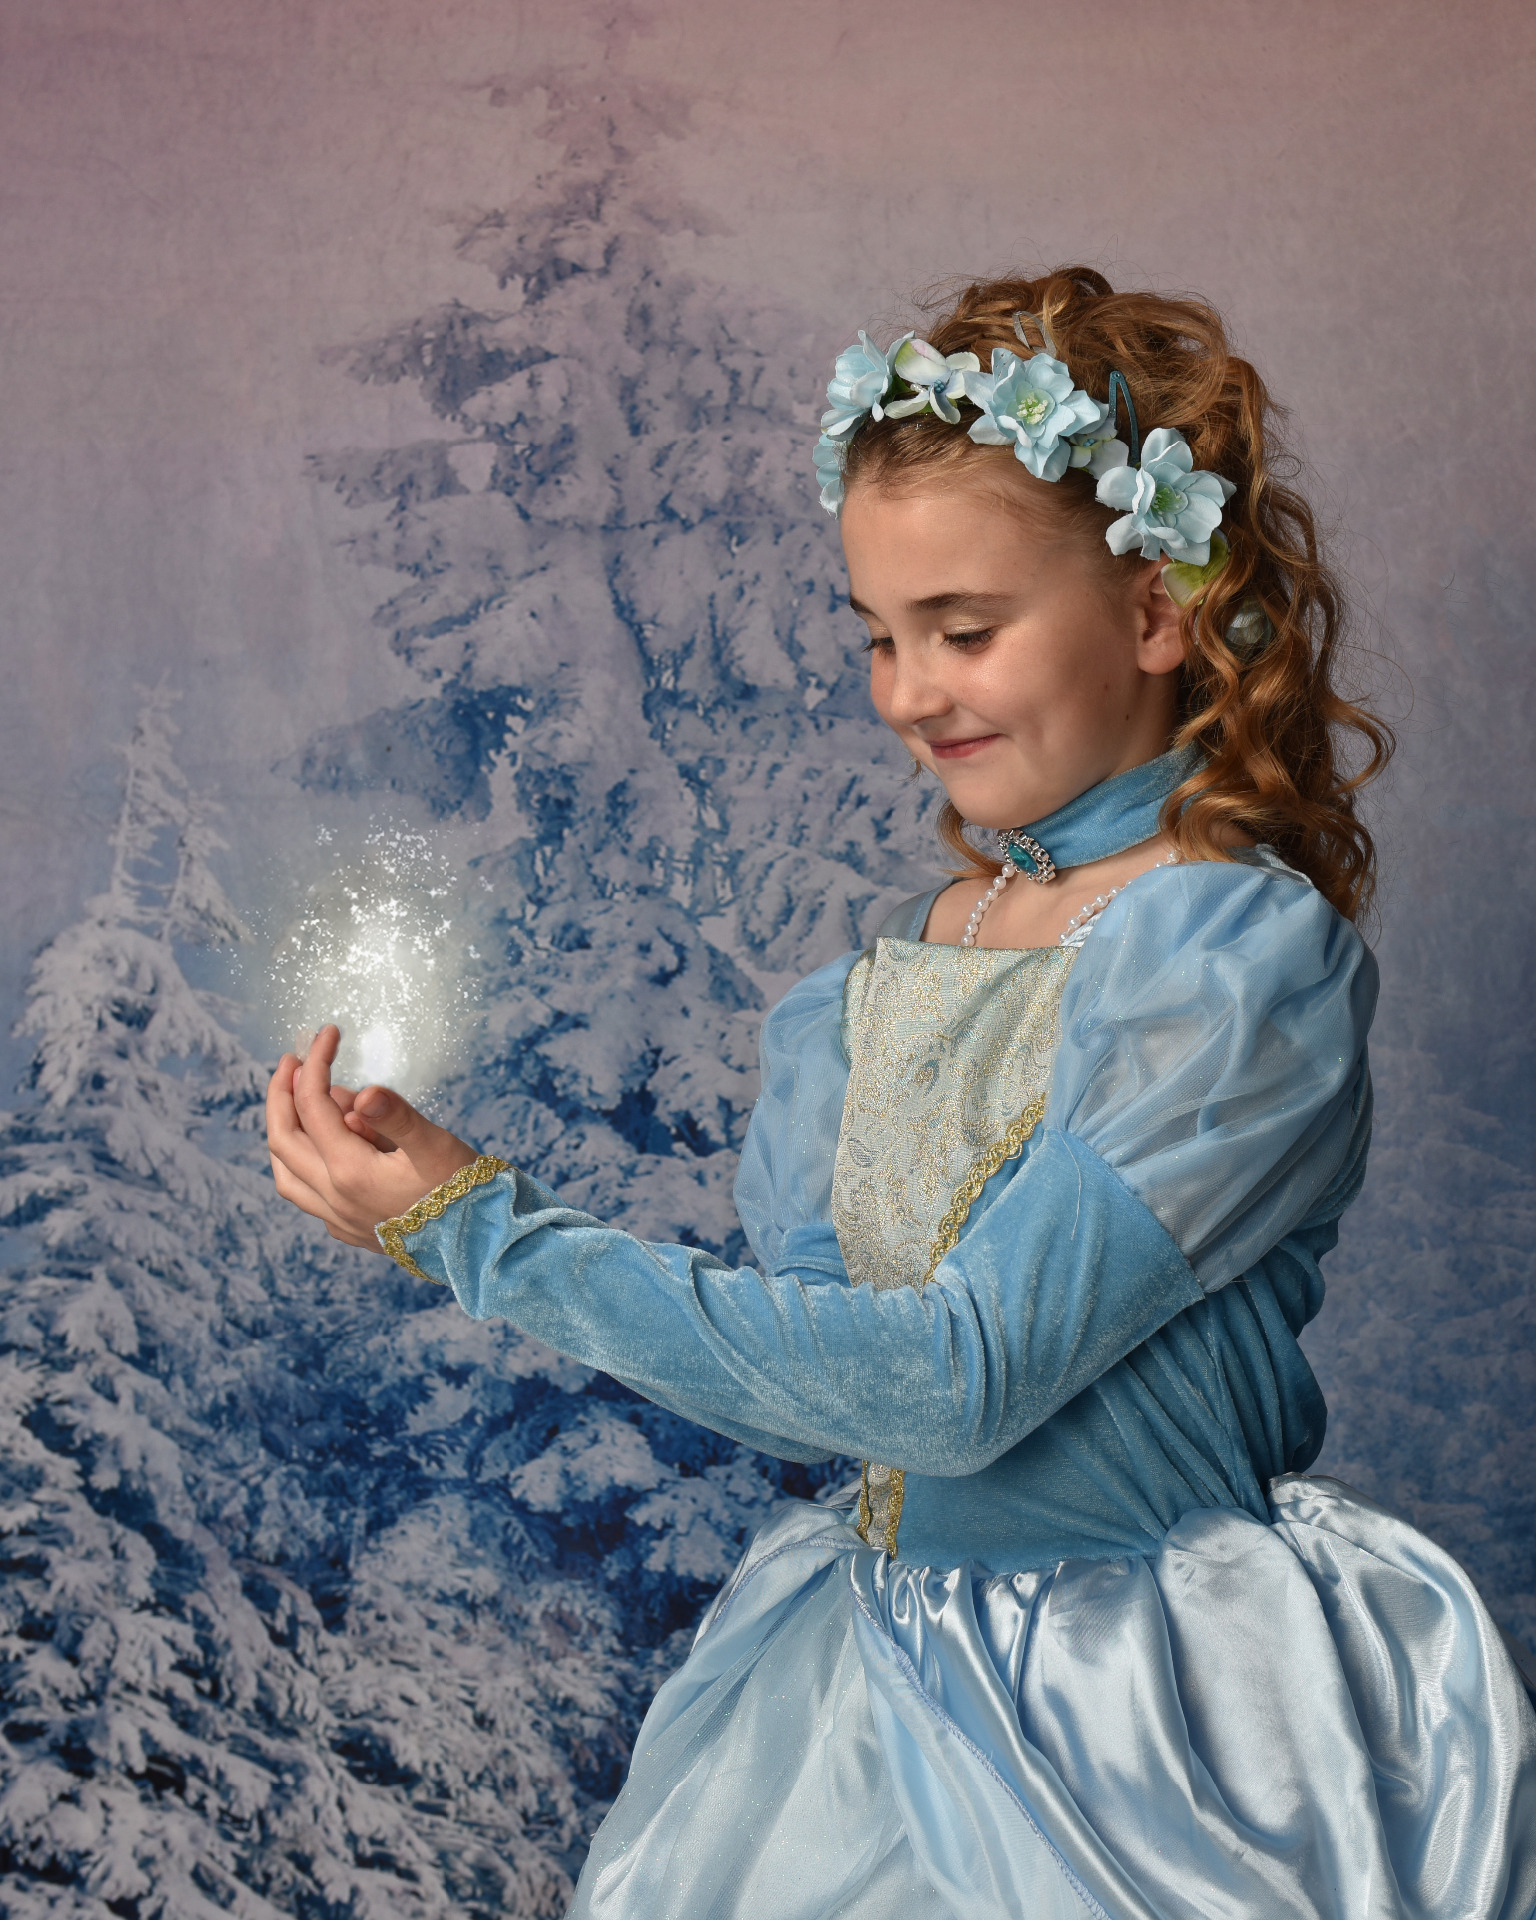 Frozen themed photography in Staffordshire, UK